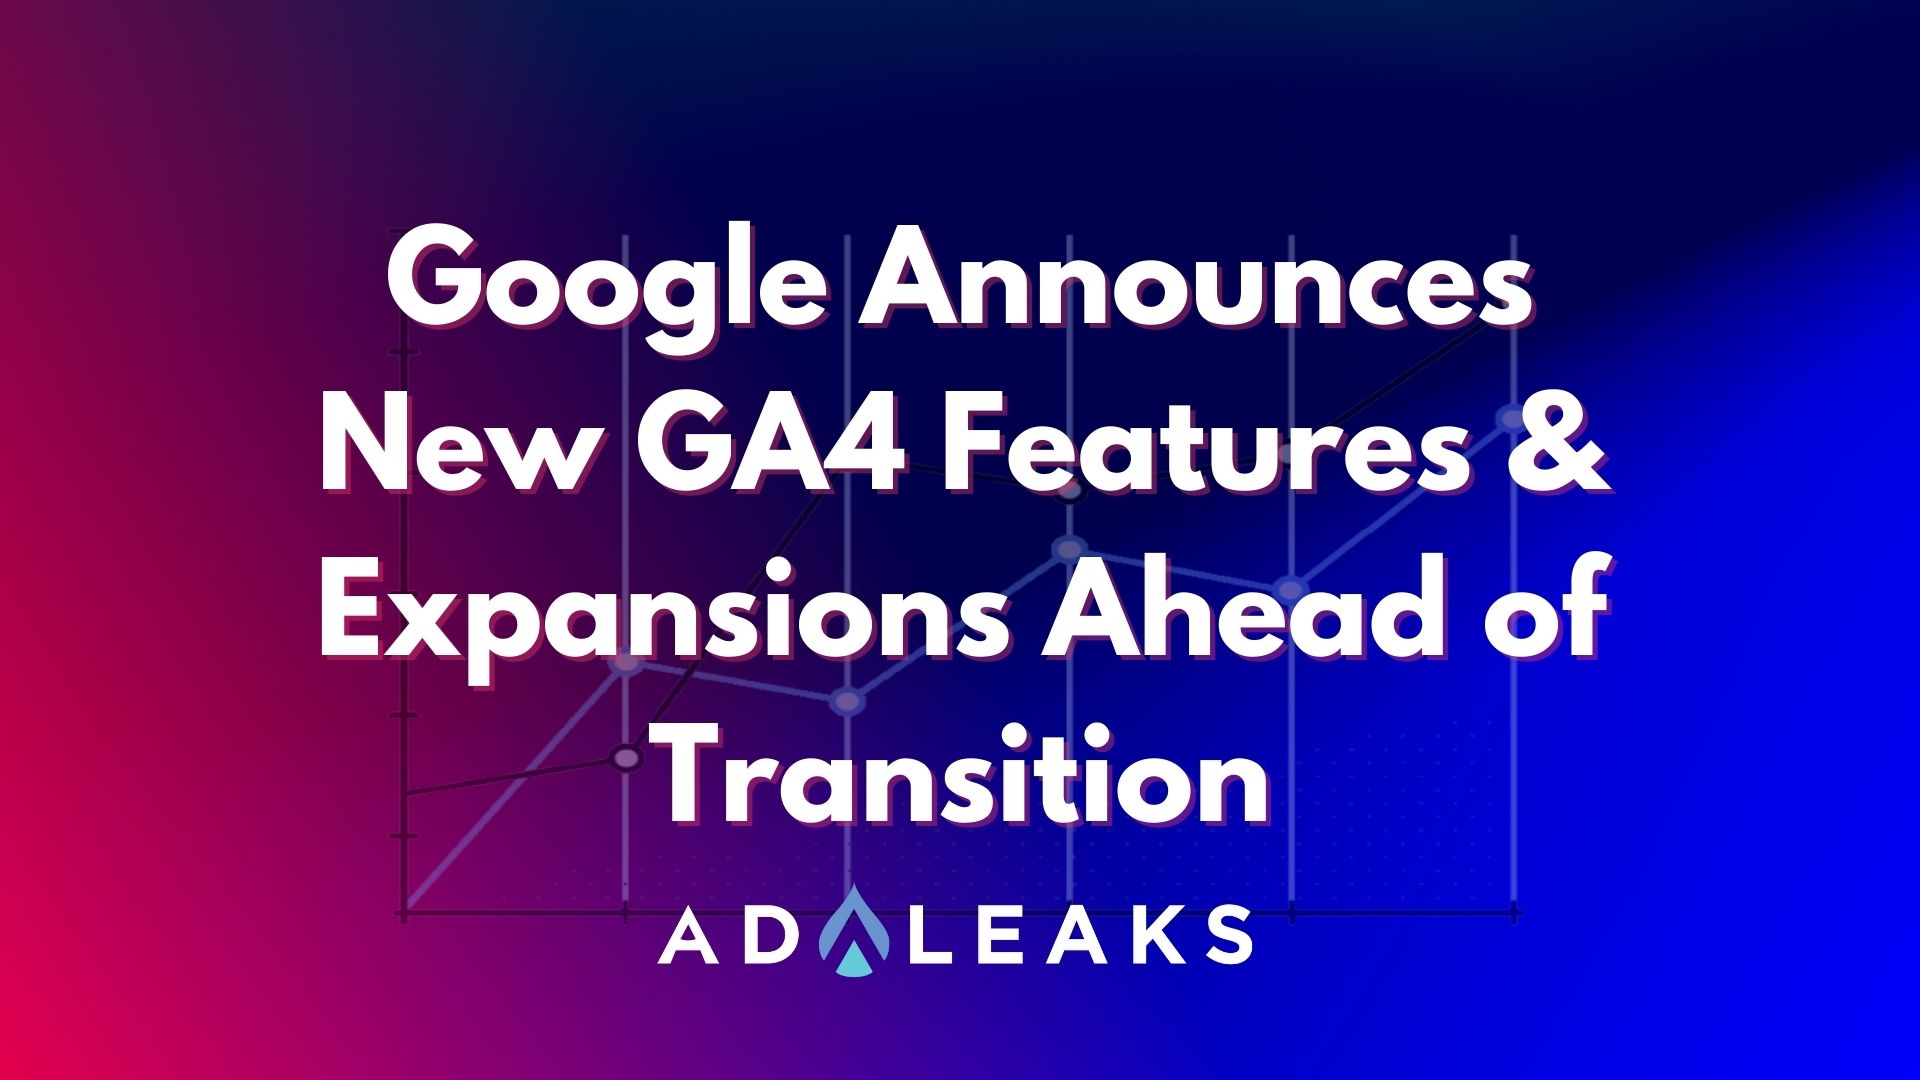 google announces new ga4 features & expansions ahead of transition